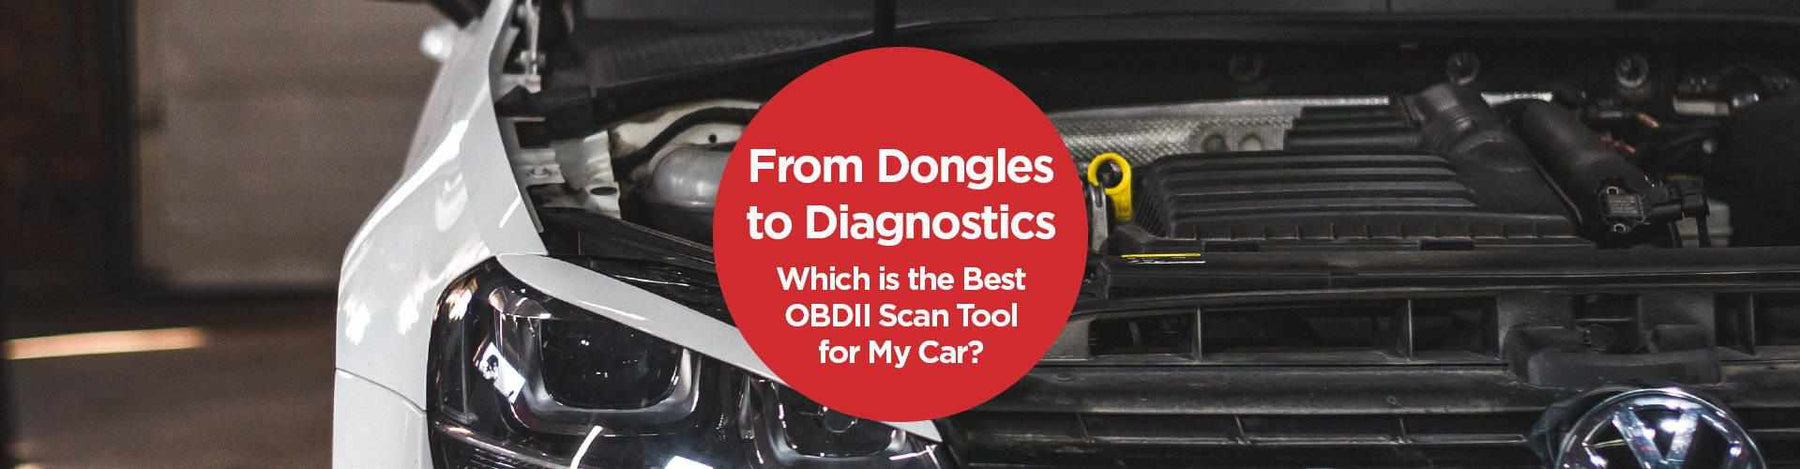 From Dongles to Diagnostics: Which is the best OBD2 Scan Tool for my car? - - BlackboxMyCar Canada